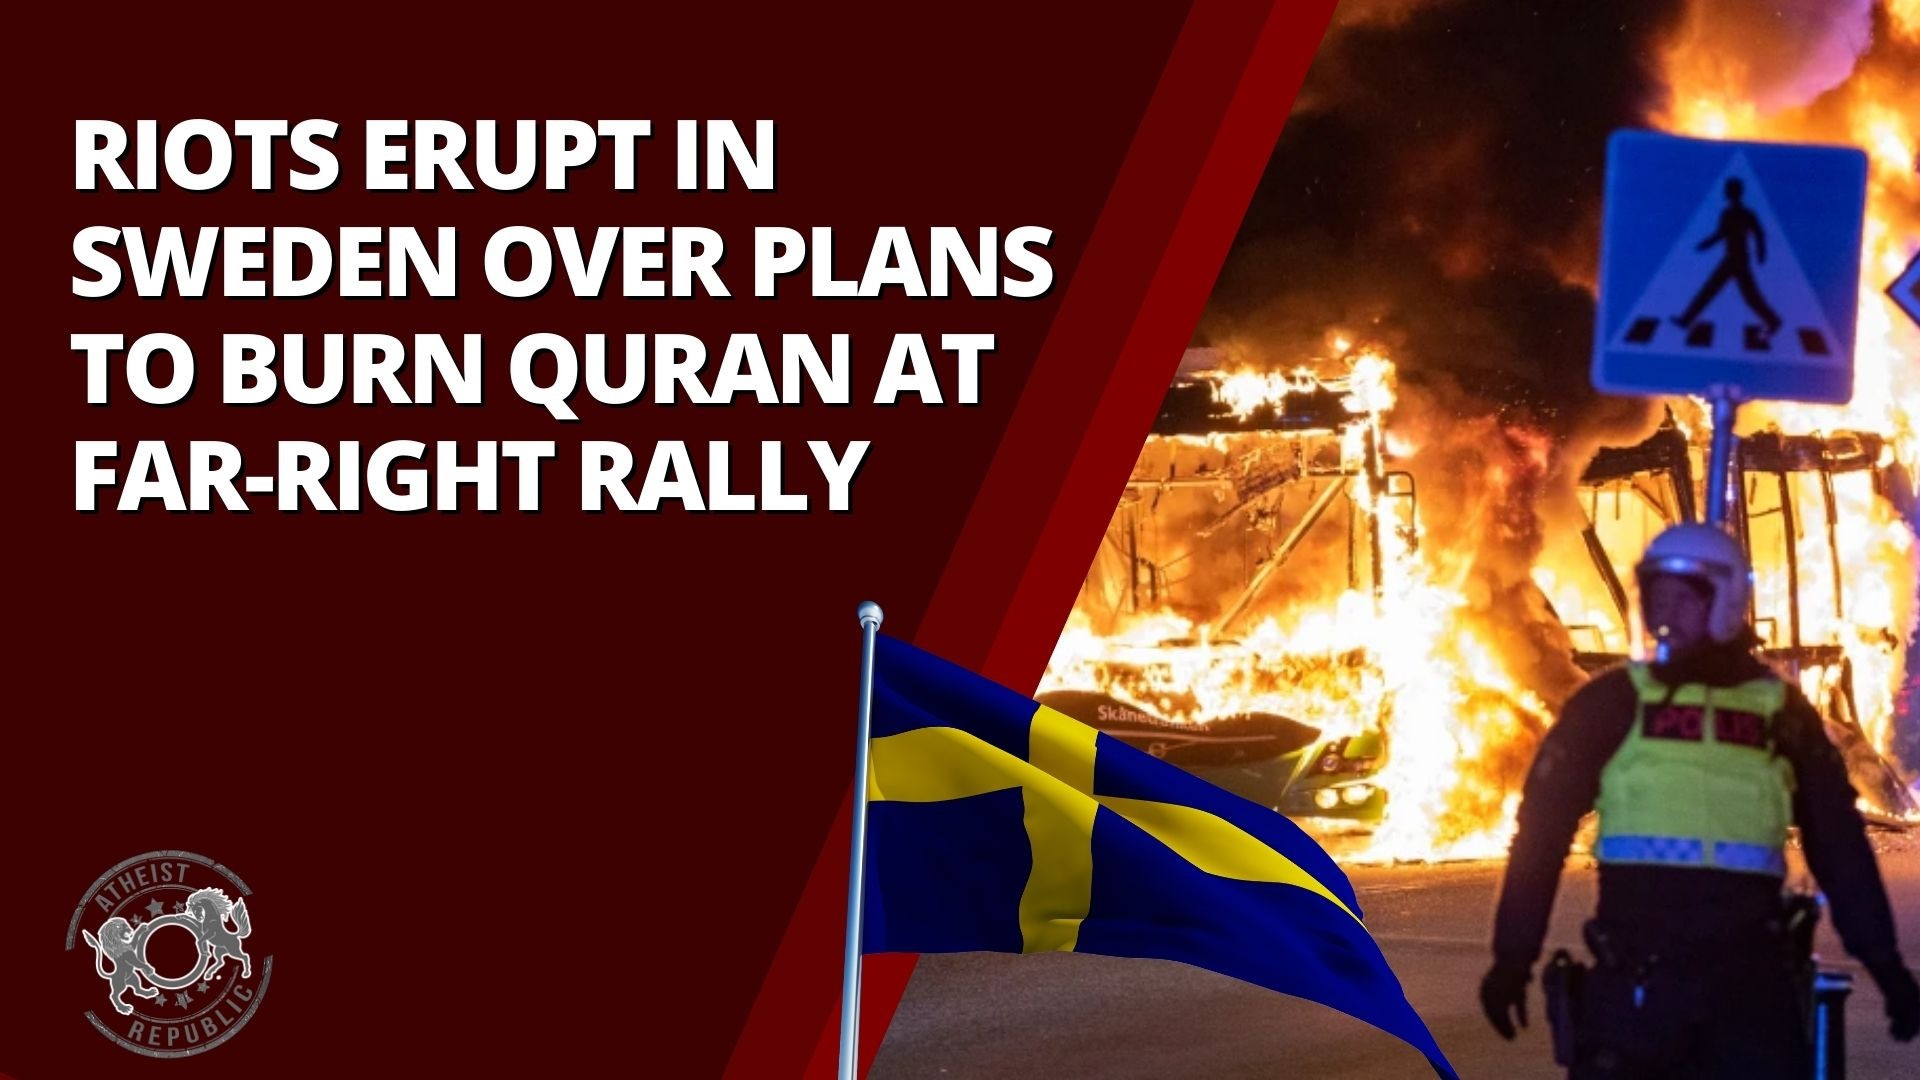 Riots Erupt in Sweden Over Plans to Burn Quran at FarRight Rally